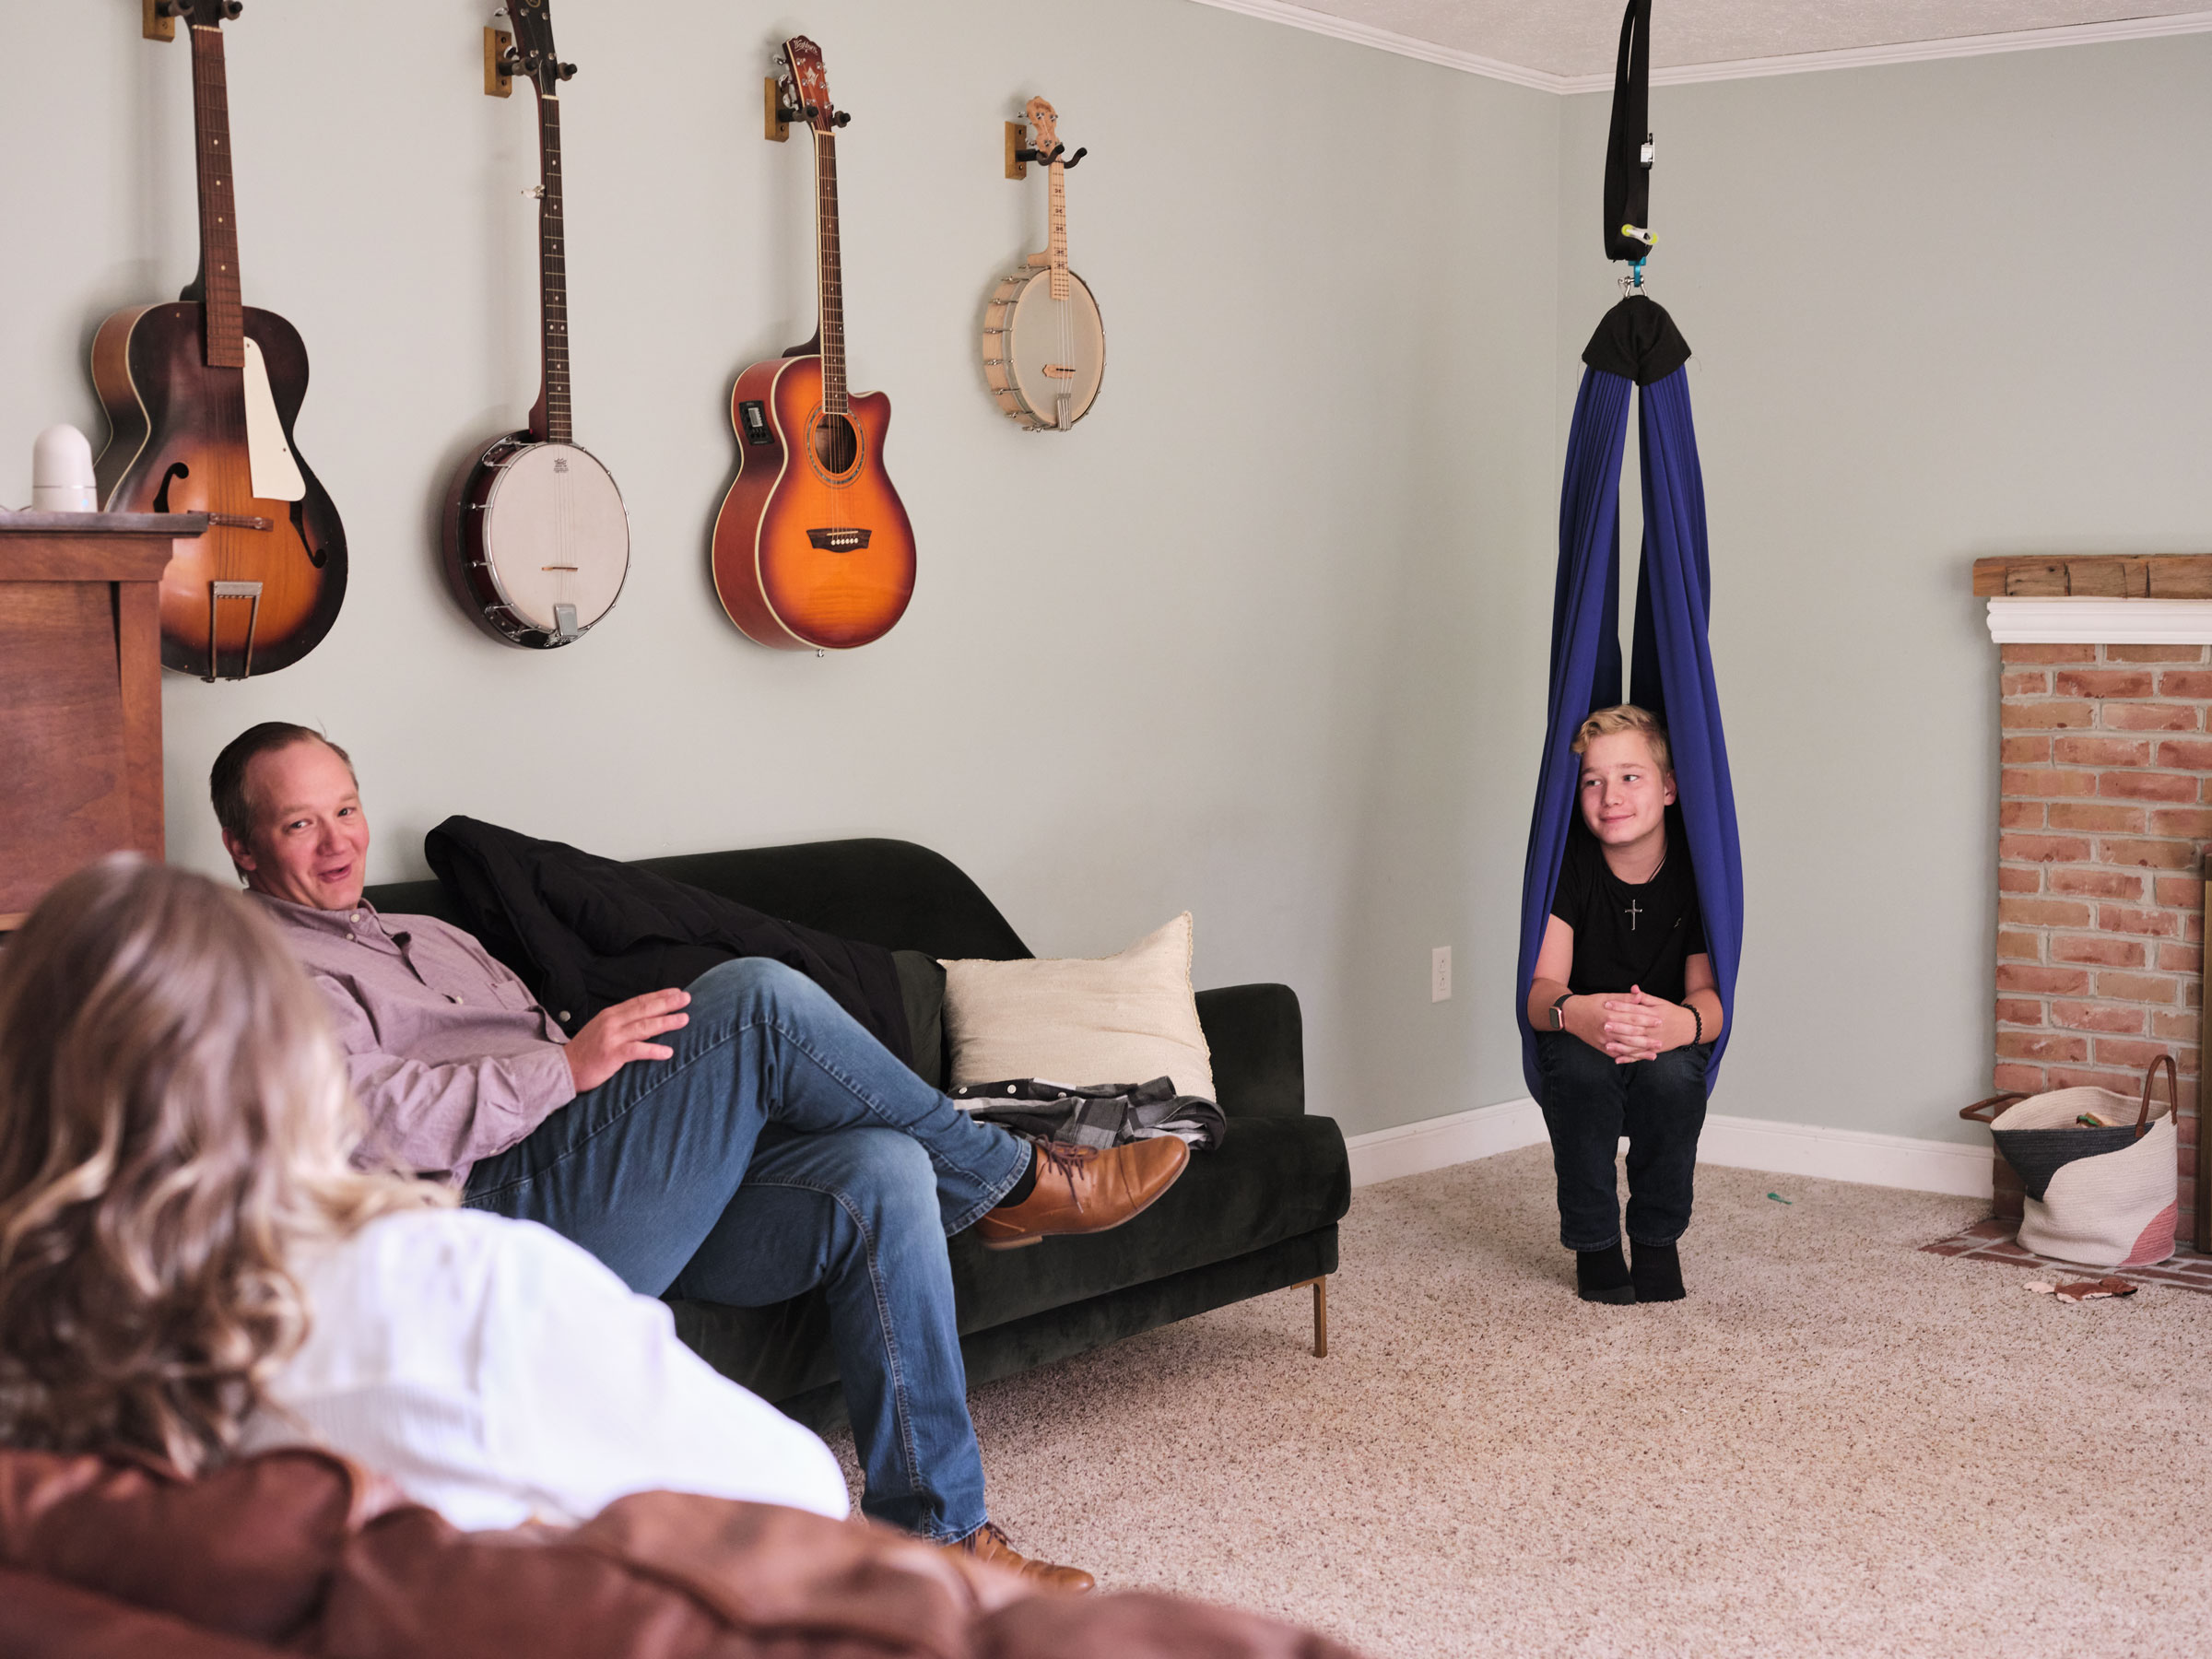 Ayden chats with his parents while sitting in a therapy swing in their home in Ohio. The swing helps Ayden manage some of his pain, allowing him to rest and recharge when he is tired or in pain. (Julie Renée Jones for TIME)